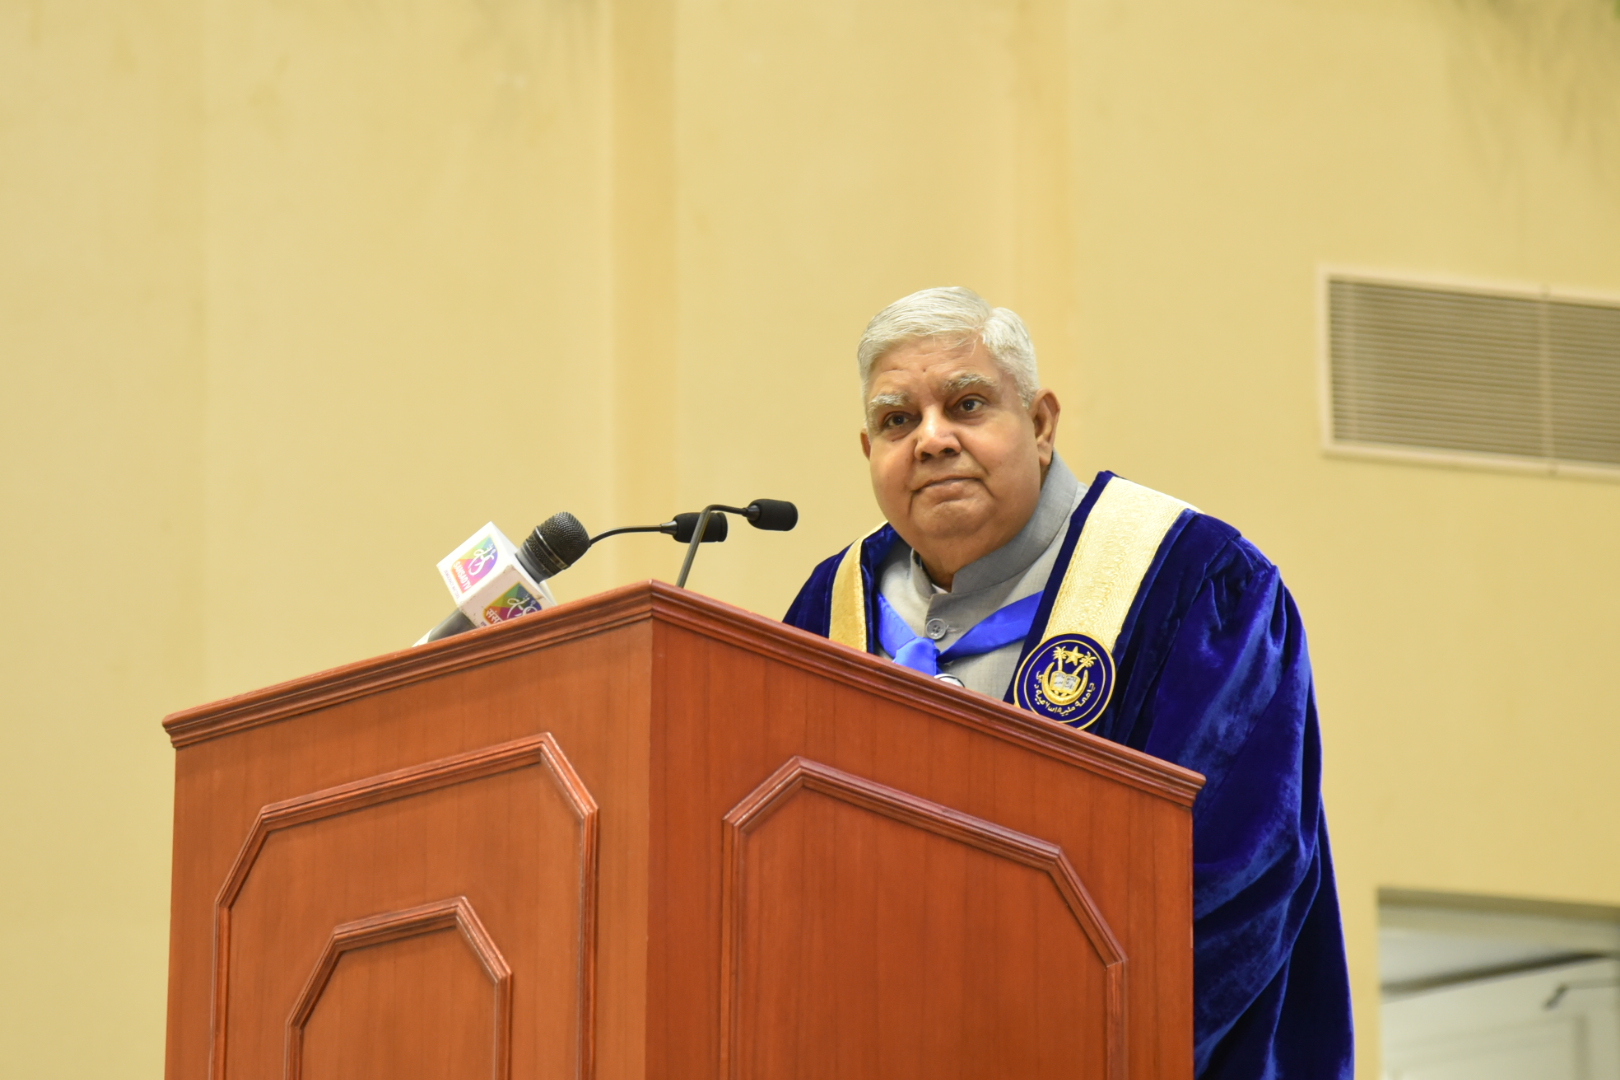 The Vice President, Shri Jagdeep Dhankhar addressing the gathering during the Centenary Year Convocation of Jamia Millia Islamia at Vigyan Bhawan in New Delhi on July 23, 2023.